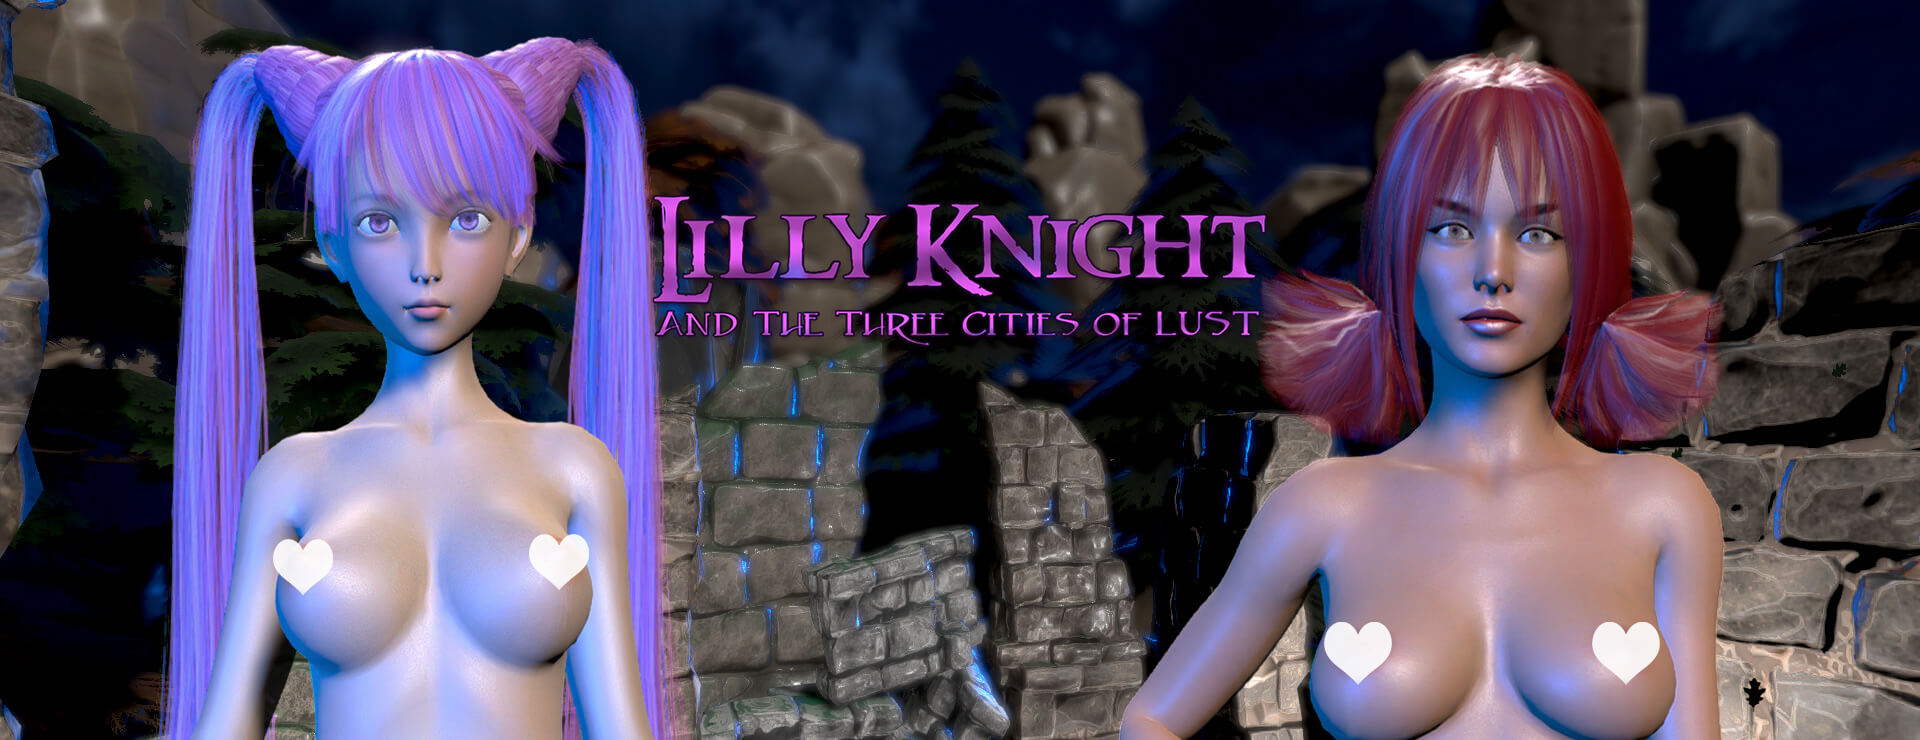 Lilly Knight and the Three Cities of Lust - Action Aventure Jeu